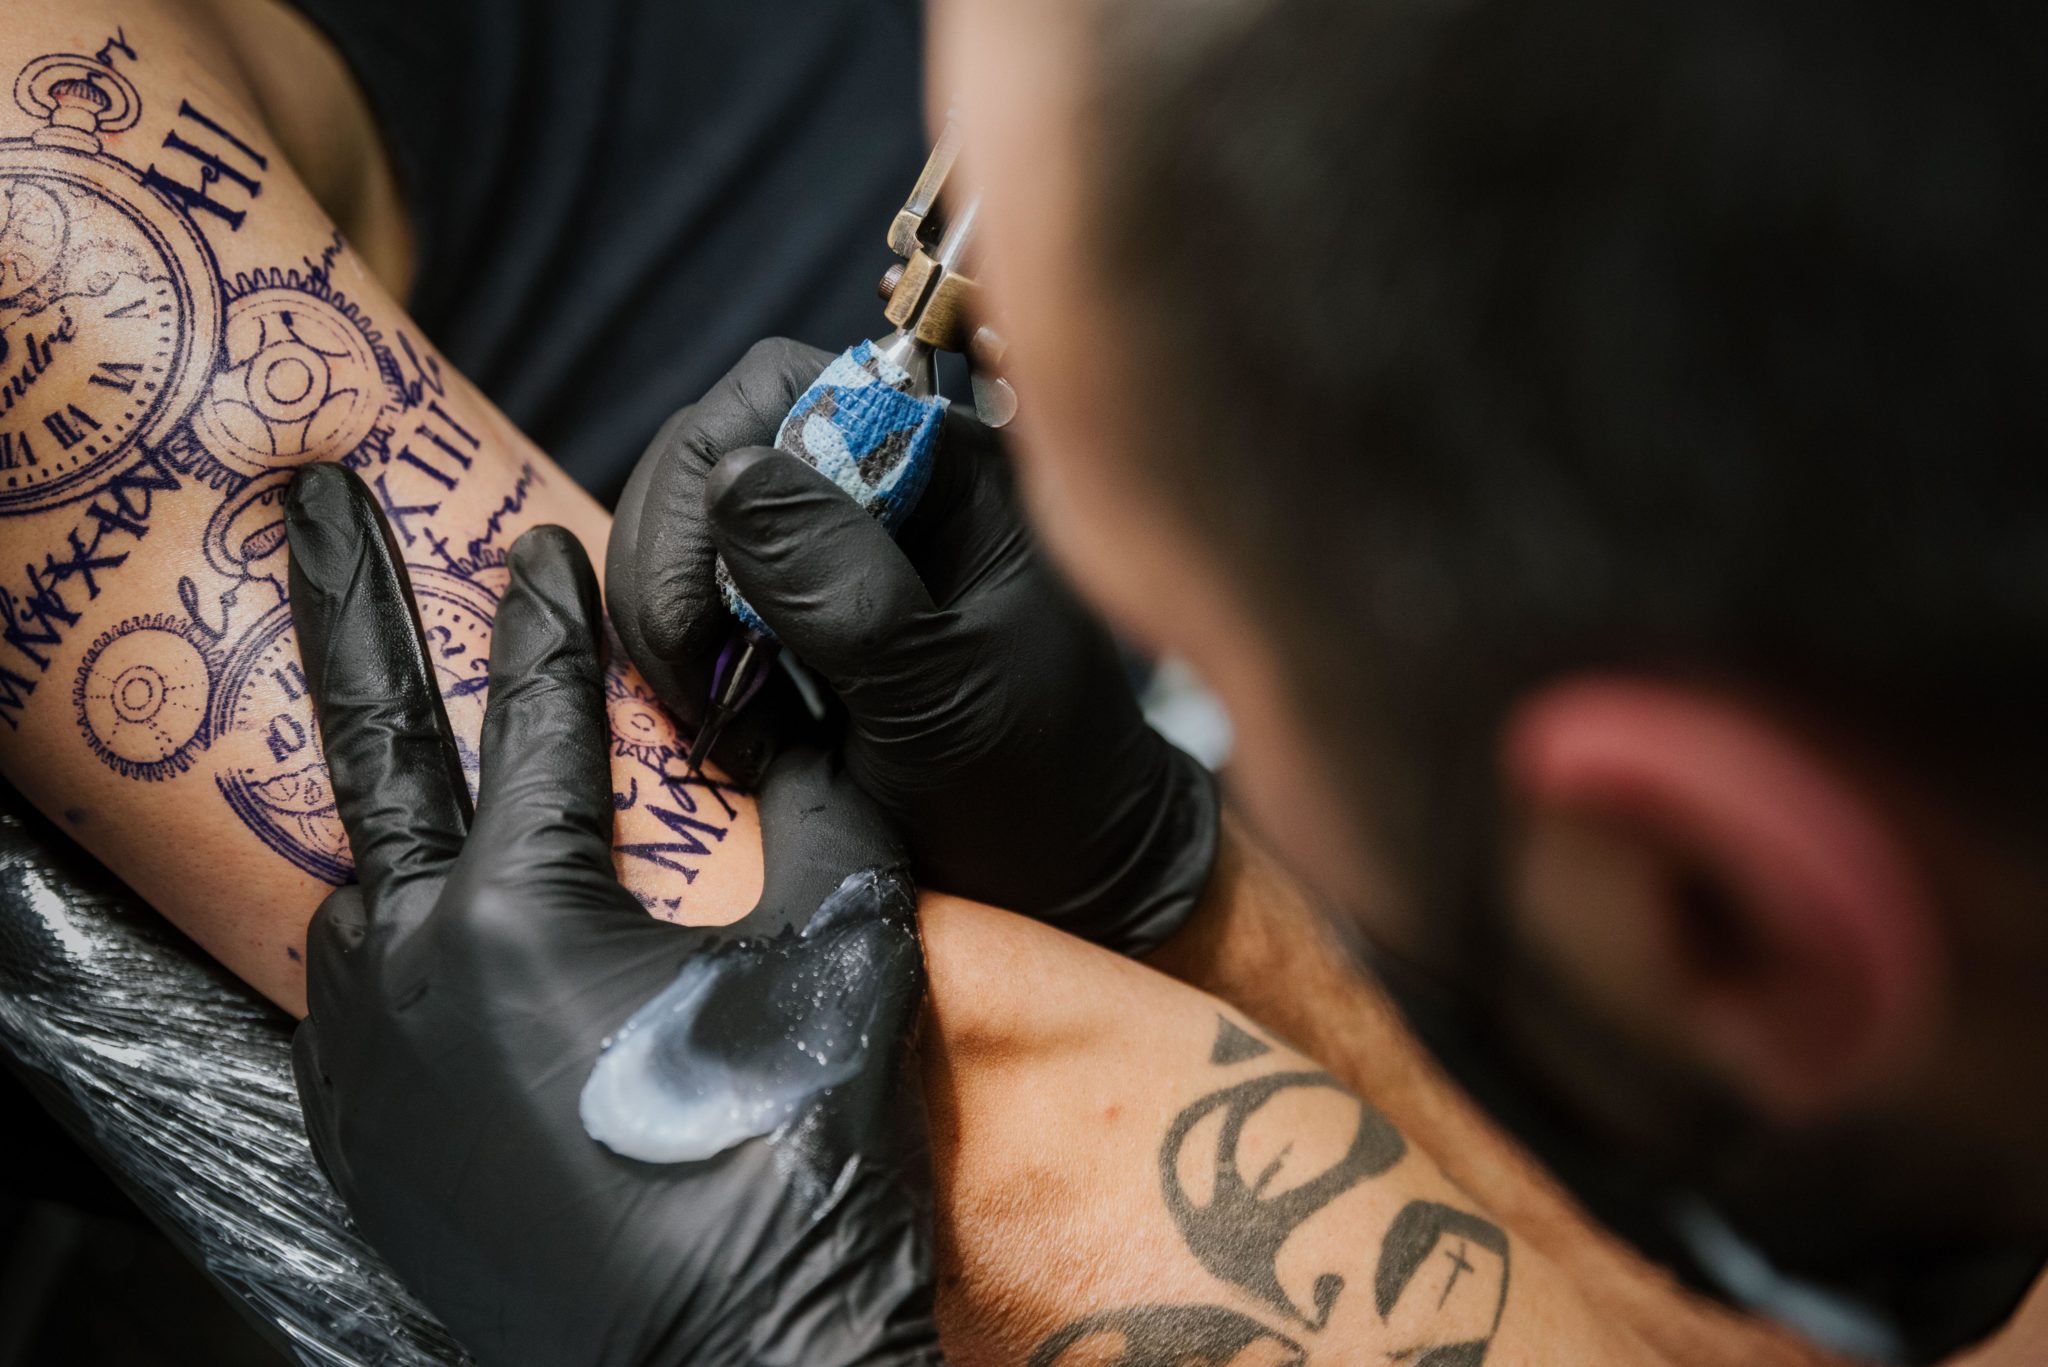 EU 'ink ban' could force tattoo artists out of business | Newstalk